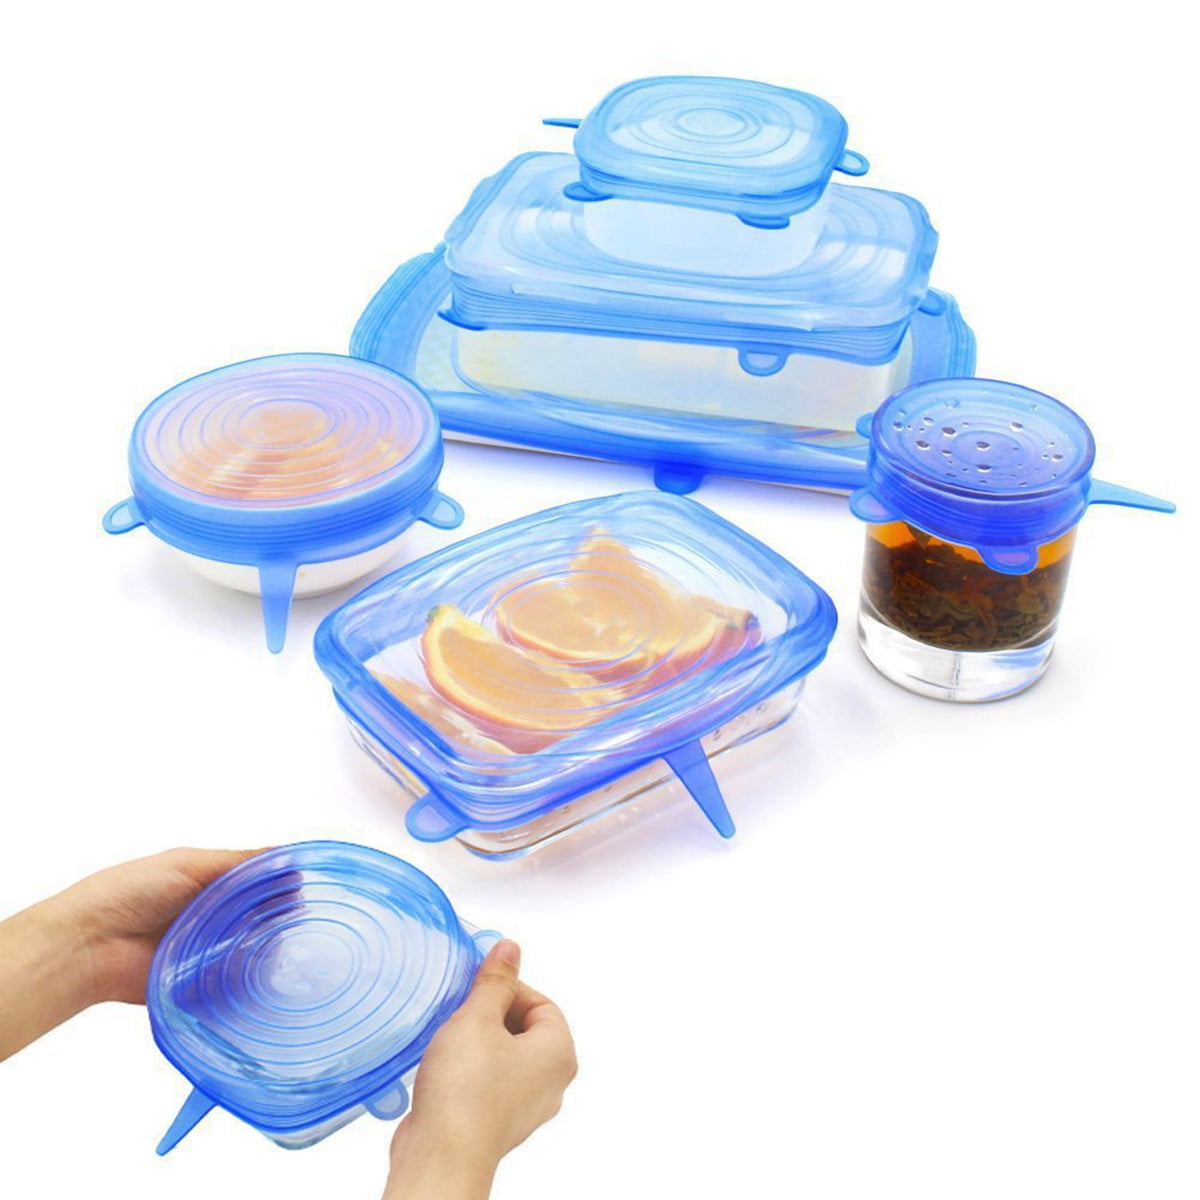 6pcs Set Different Size New Zero-Waste Reusable Food and Container Lids 